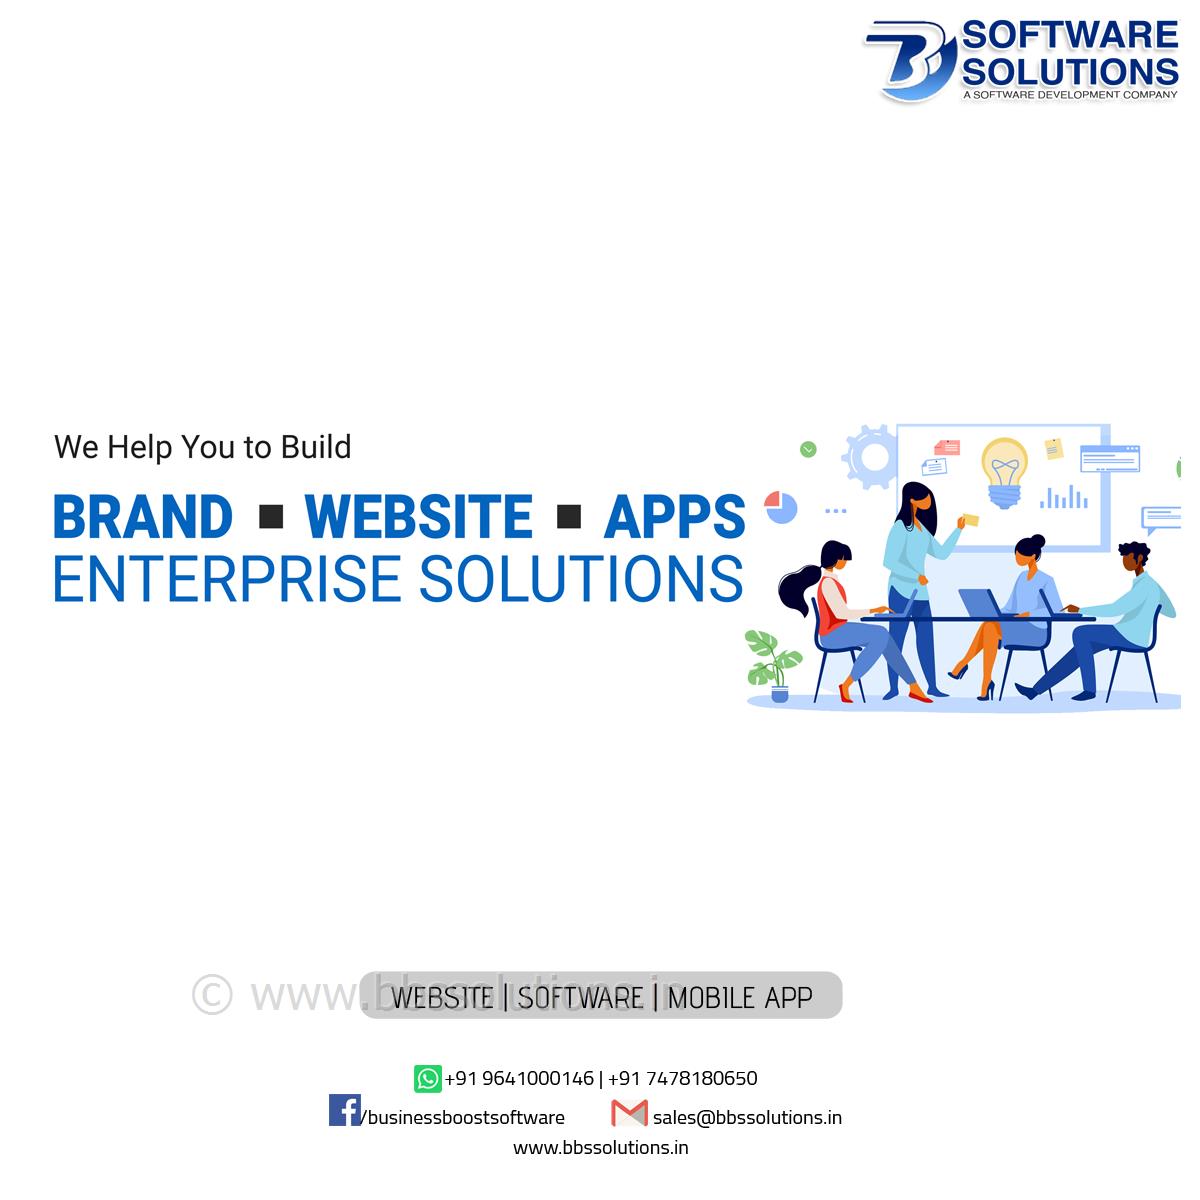 GOOGLE WEB STORIES #1...  Business Boost Software Solutions do Best Software ,Web Development,Mobile App solutions provider in siliguri , india, WestBengal , Assam , Siliguri , Jalpaiguri ,Dhupguri,
    Best website designing in Siliguri with affordable packages and quick support. Get effective website design in Siliguri from best website designers. #bbssolutions , #SEO  , #DigitalMarketing  , #WebDesign  , #SoftwareDevelopment  , #FacebookAds  , #GoogleAds  , #GoogleSEO  , #WebsiteDesigning 
     , #Software  , #website  , #BusinessBoostSoftwareSolutions  , bbssolutions,SEO, Digital Marketing, WebDesign, Software Development, Facebook Ads, Google Ads, Google SEO, Website Designing, 
    Software, website, Business Boost Software Solutions, 9641000146,7478180650,best GST software in West bengal,Best GST software company in north bengal,GST solution in west bengal
    ,gst solutions in north bengal,best customize software in siliguri , india,best customize software in west bengal,best customize software in dhupguri,news portal website in west bengal
    ,news portal website in siliguri , india,regional news portal website in siliguri , india,school software in west bengal,school software in north bengal,school website in north bengal,
    school software in north bengal,android app, ios app, ecommerce website, ecommerce software,Web designing, website designing, ecommerce website, how to make website, create website, 
    website development company, web page design, seo, search engine optimization, seo siliguri , india , 
    seo company, best seo company, seo services, responsive web design, web designing companies, 
    how to create a website, internet marketing, digital marketing, online marketing, social media marketing, 
    promotion,web designing in Siliguri,web designing in Siliguri siliguri , india,web designing in siliguri , india,GST Software  ,  GST Billing Software  ,  GST Accounting  ,  GST Ready Software,
    software company in siliguri,software company in siliguri siliguri , india,software company in north east siliguri , india,
    school software in siliguri,school software in north east siliguri , india,customize software,free software demo,
    reasonable price software,cost effective software,resonable price software,free demo software,free software,best software support,free software support,best software company in siliguri , india,
    best software company in siliguri,MLM Software company in Siliguri,Binary Software company in Siliguri,
    top ten software company in north bengal,top ten software company in siliguri,top ten software company in siliguri , india,
    top ten software company in north east,software development siliguri , india,west bengal,kolkata,siliguri , software company in siliguri , india
     , software development west bengal , Customized software siliguri , india , software for hotel,medicine distributors,
    jewellery shop , best software company in siliguri,jalpaiguri,sikkim,darjeeling  , Business Boost Softwate Solutions  ,  
    Web designing company in siliguri  ,  ecommerce designing company in siliguri  ,  web development company in siliguri  ,  
    software development comapny in siliguri  ,  software development in sikkim  ,  website designing company in sikkim  ,  
    SEO service in sikkim  ,  web designing company in siliguri  ,  web designing compnay in North Bengal  ,  
    SEO service in siliguri  ,  web designing in north bengal  ,  web designing in north east siliguri , india , website designing in siliguri, best website designing in siliguri, web design, web designer in siliguri, web designing company siliguri